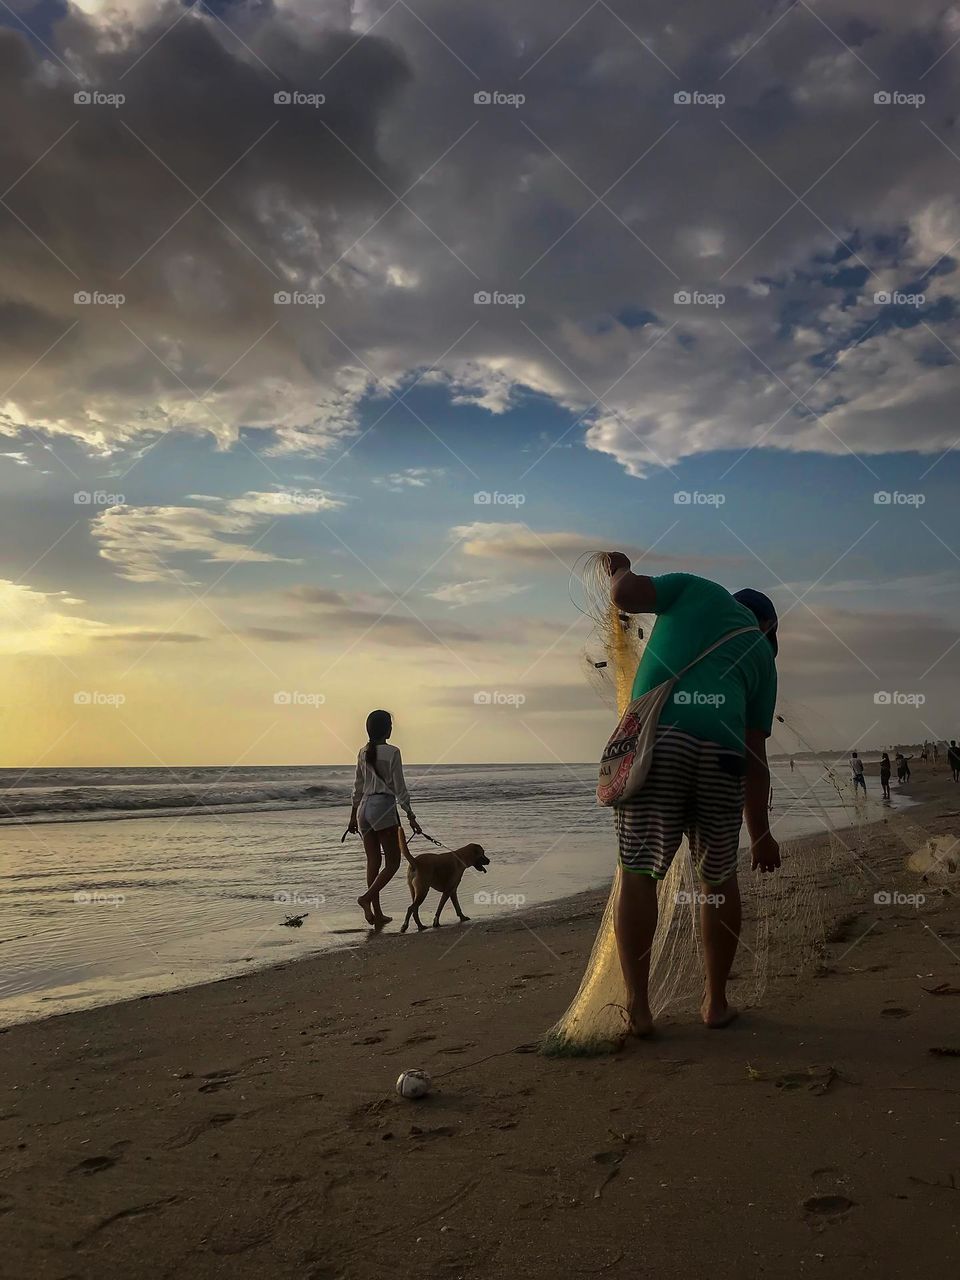 a dog and its owner walking along the beach during sunset time in Kuta, Bali, Indonesia